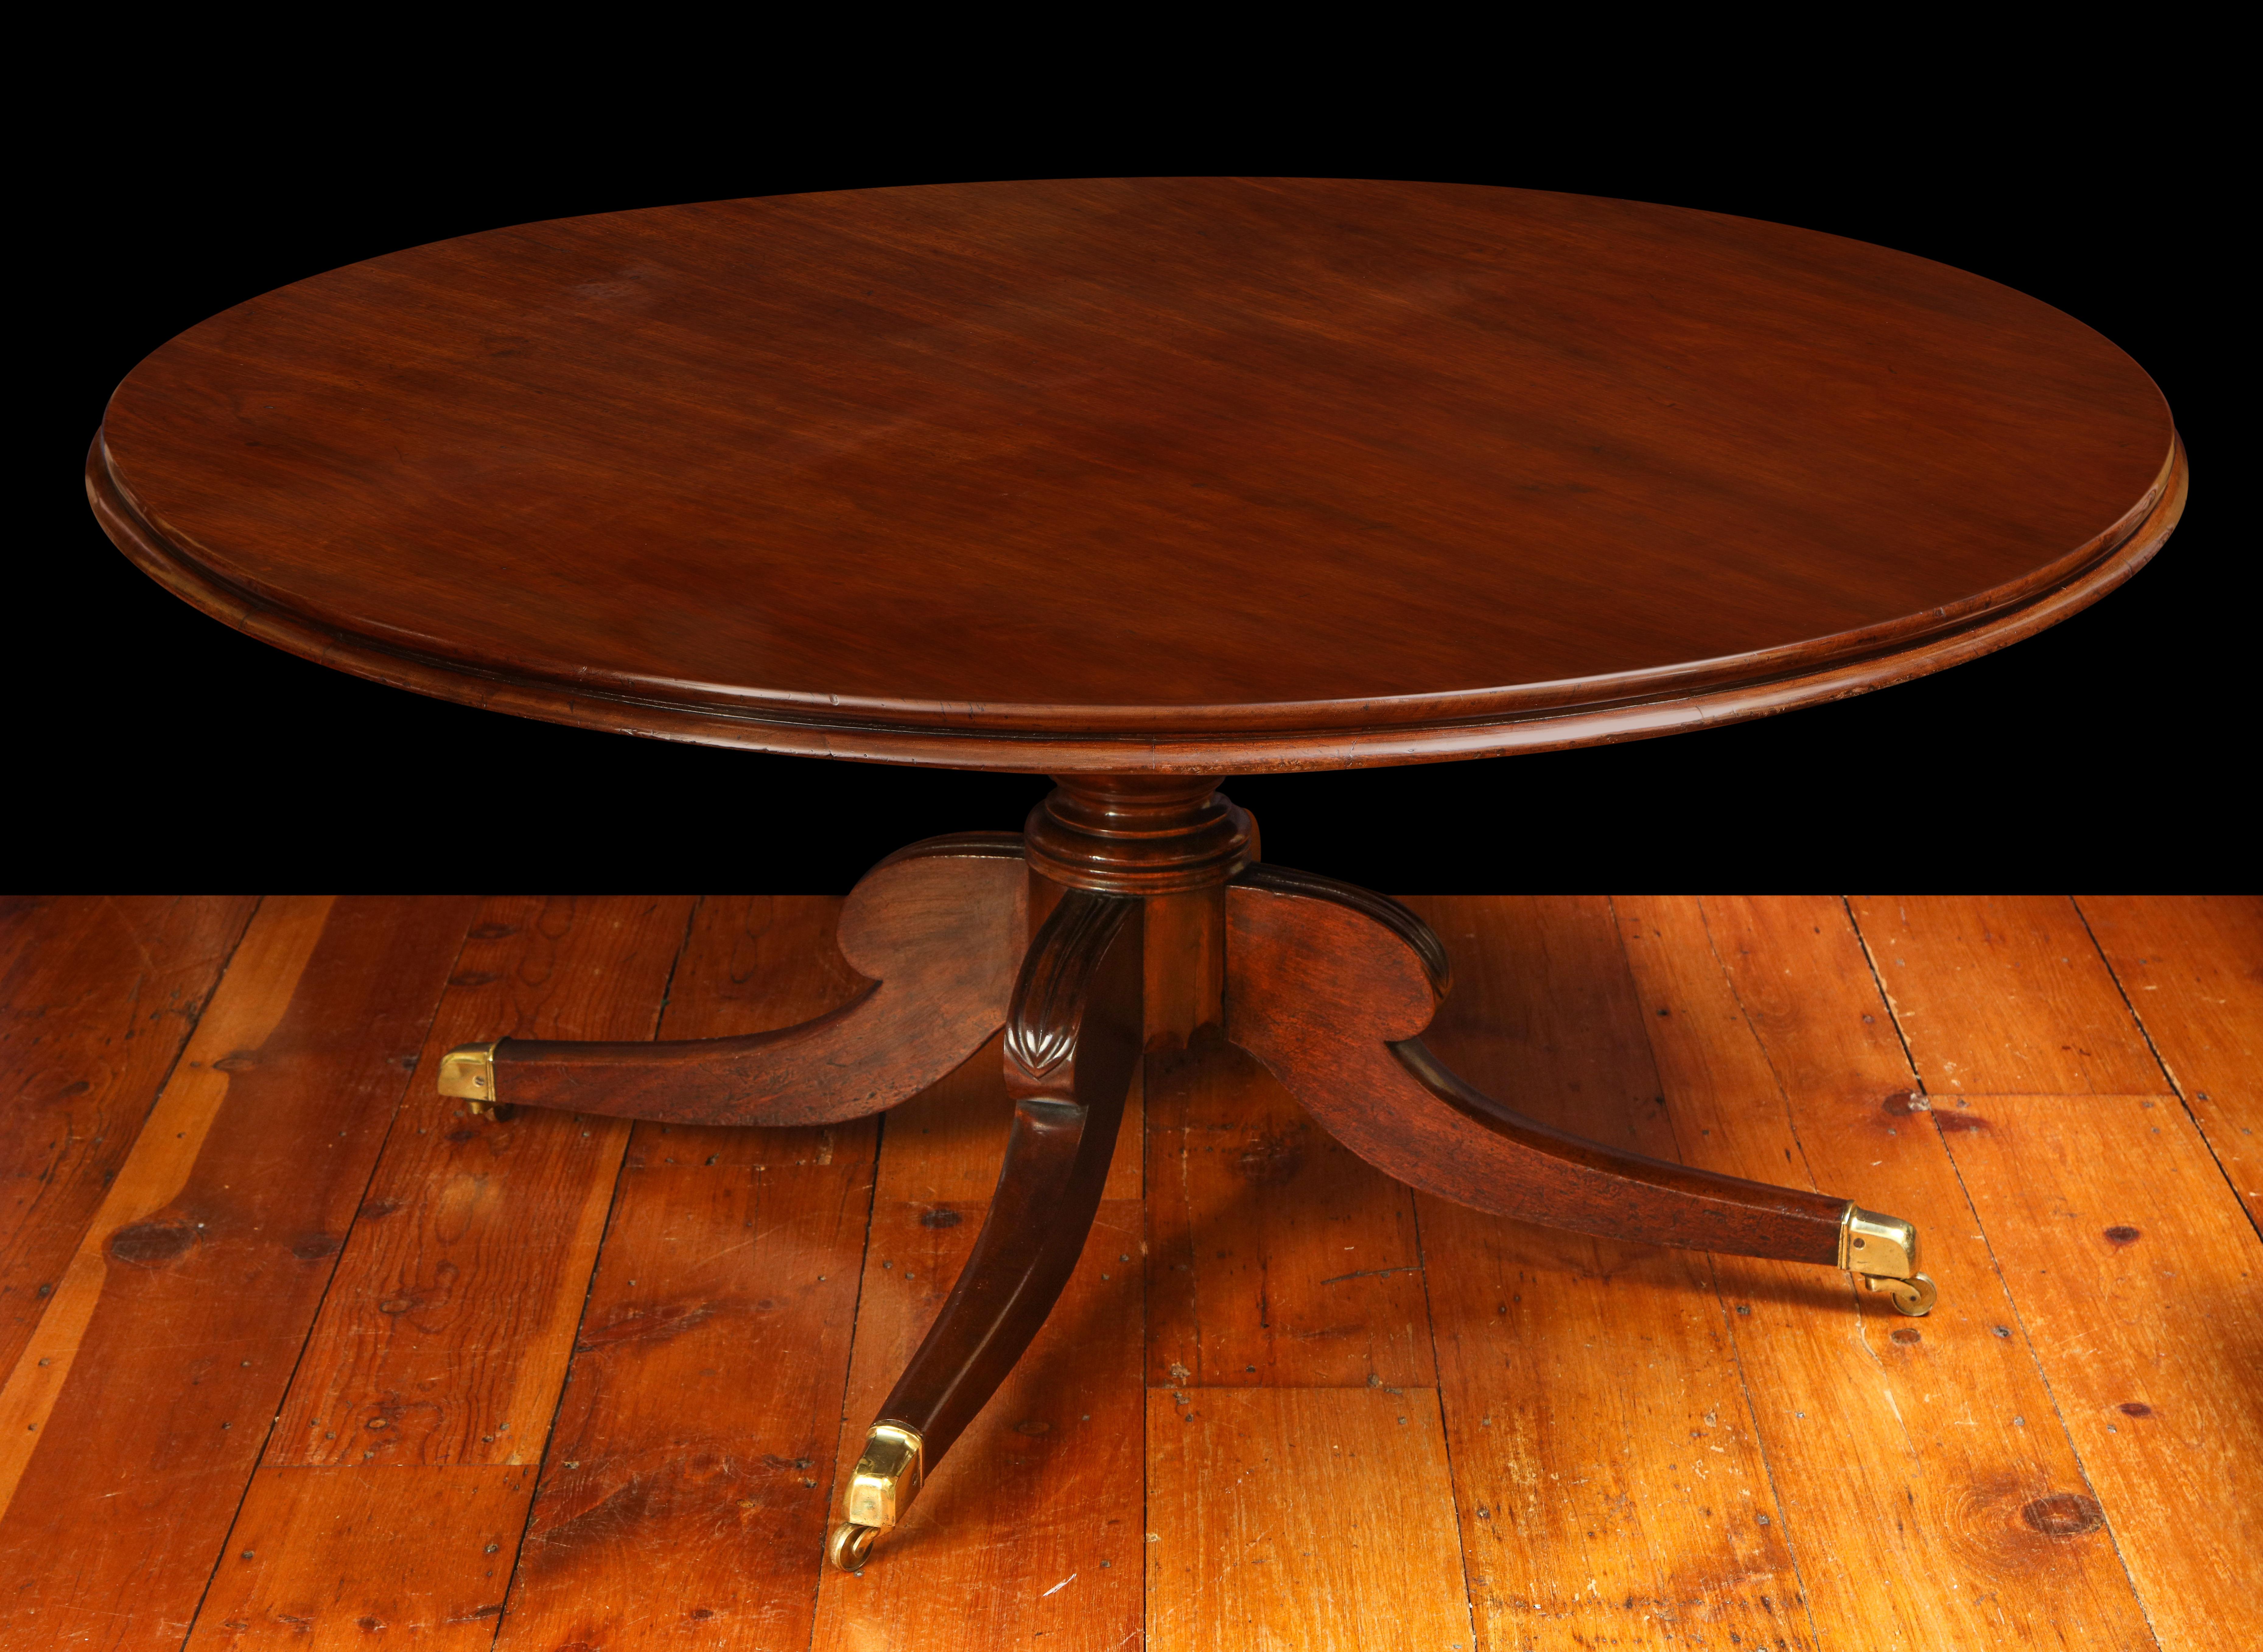 Fine Irish Circular Tilt-Top Dining/Breakfast Table, the solid top with double moulded rounded edge on a quadruped splayed base ending in brass caps and casters. Irish circa 1840 Attributed to Mack & Gibton, Dublin Cabinetmakers. The twin top